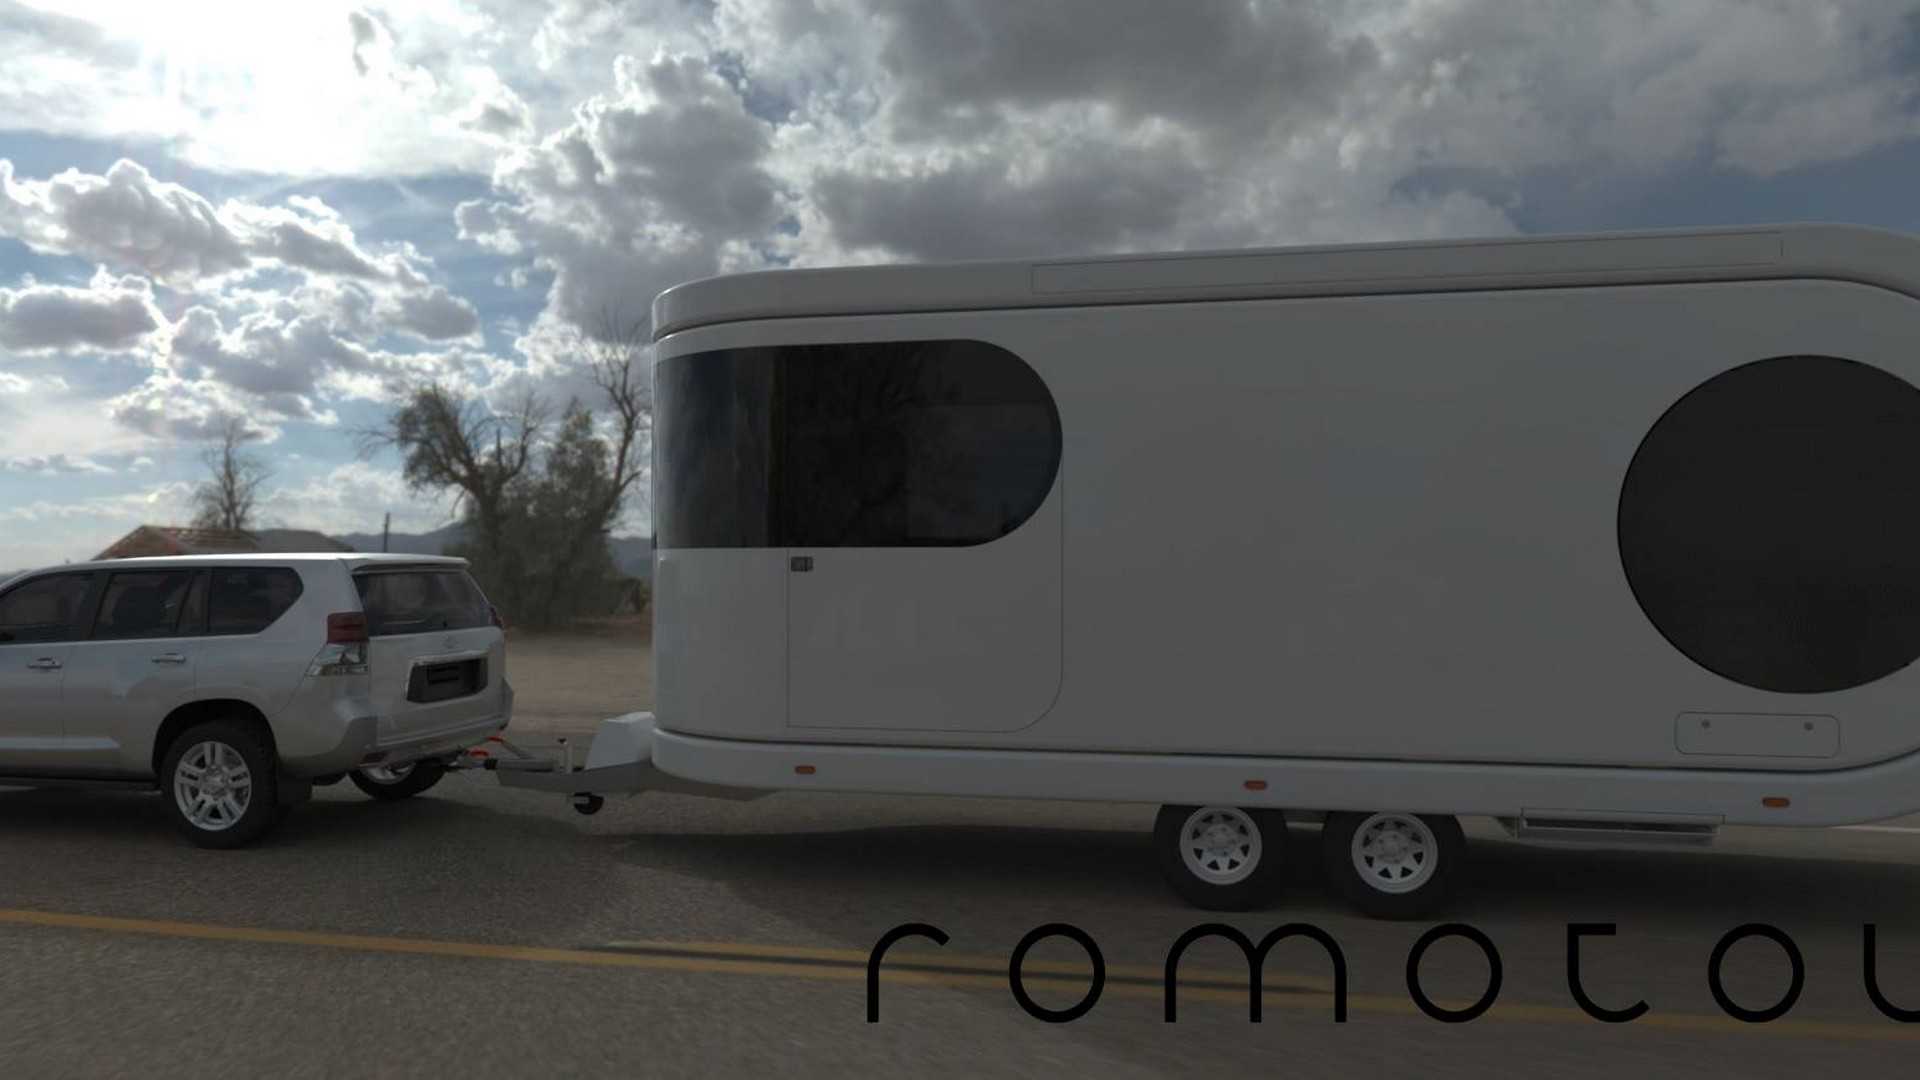 https://s1.cdn.autoevolution.com/images/news/gallery/romotow-trailer-camper-has-in-built-patio-for-the-ultimate-chill-experience_3.jpg